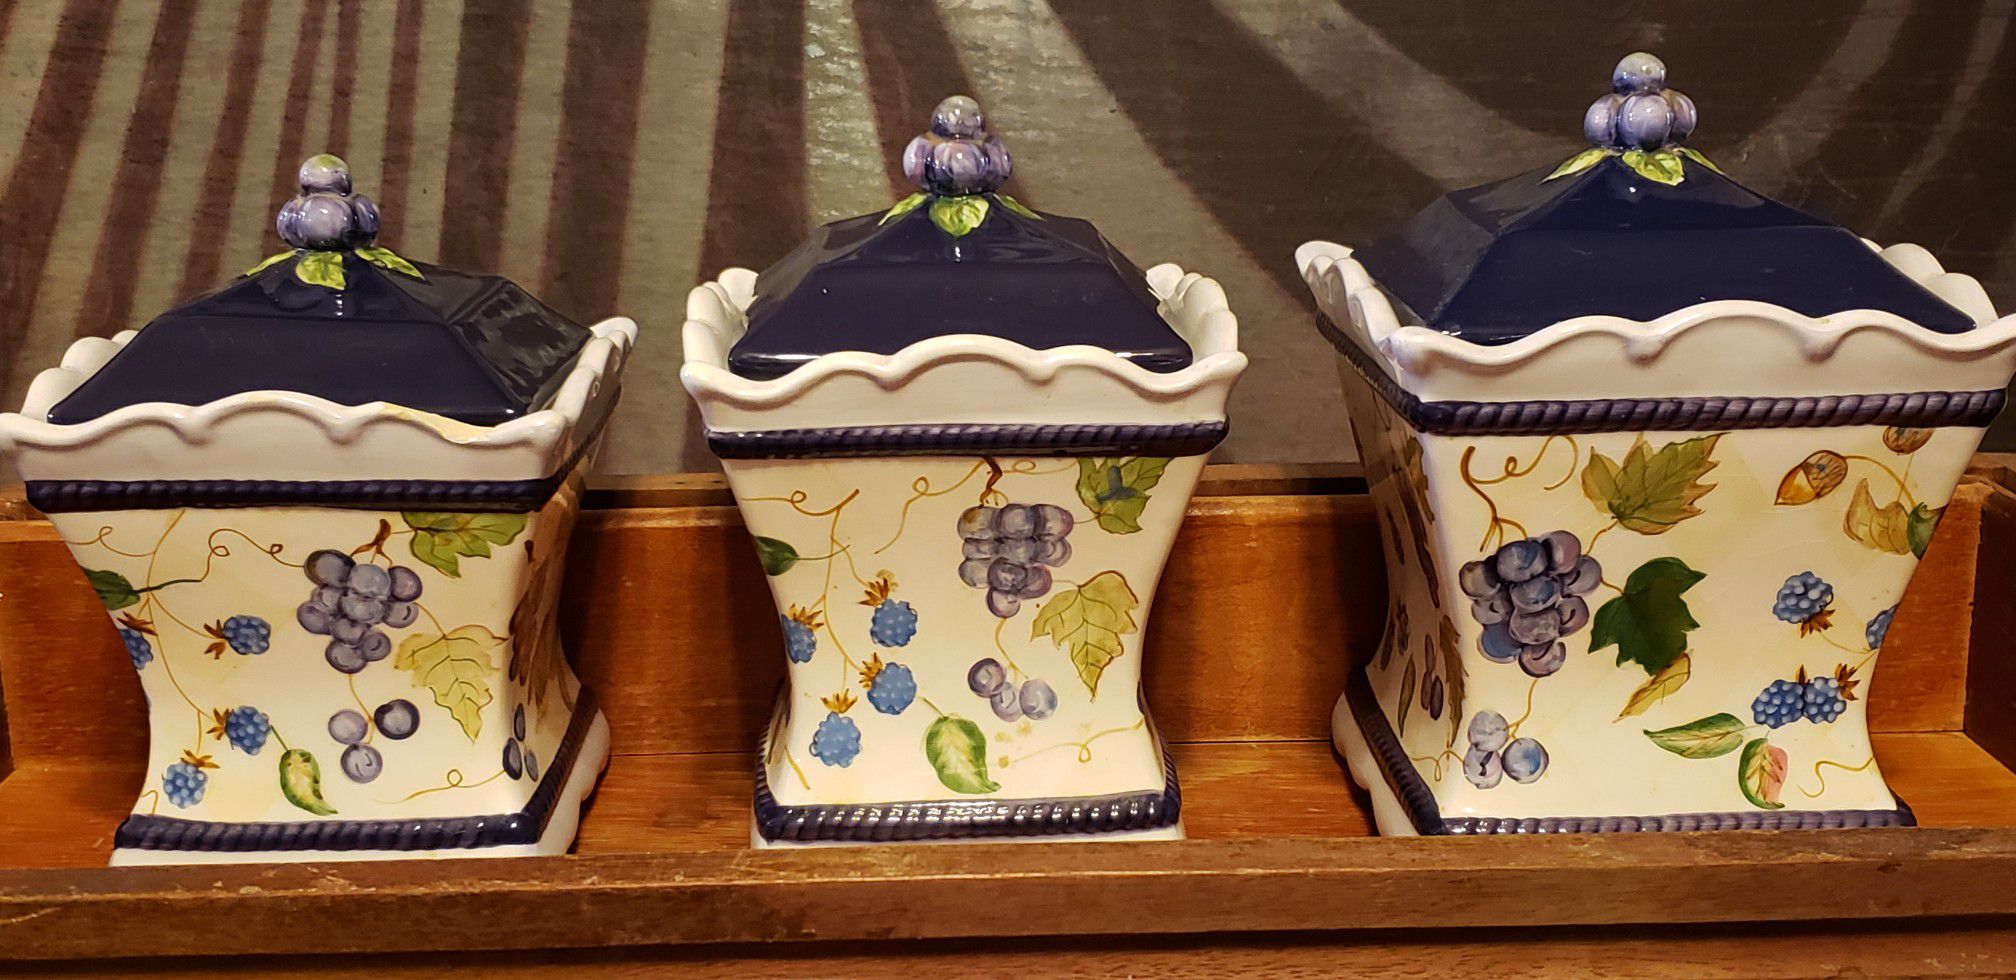 Ceramic kitchen canisters